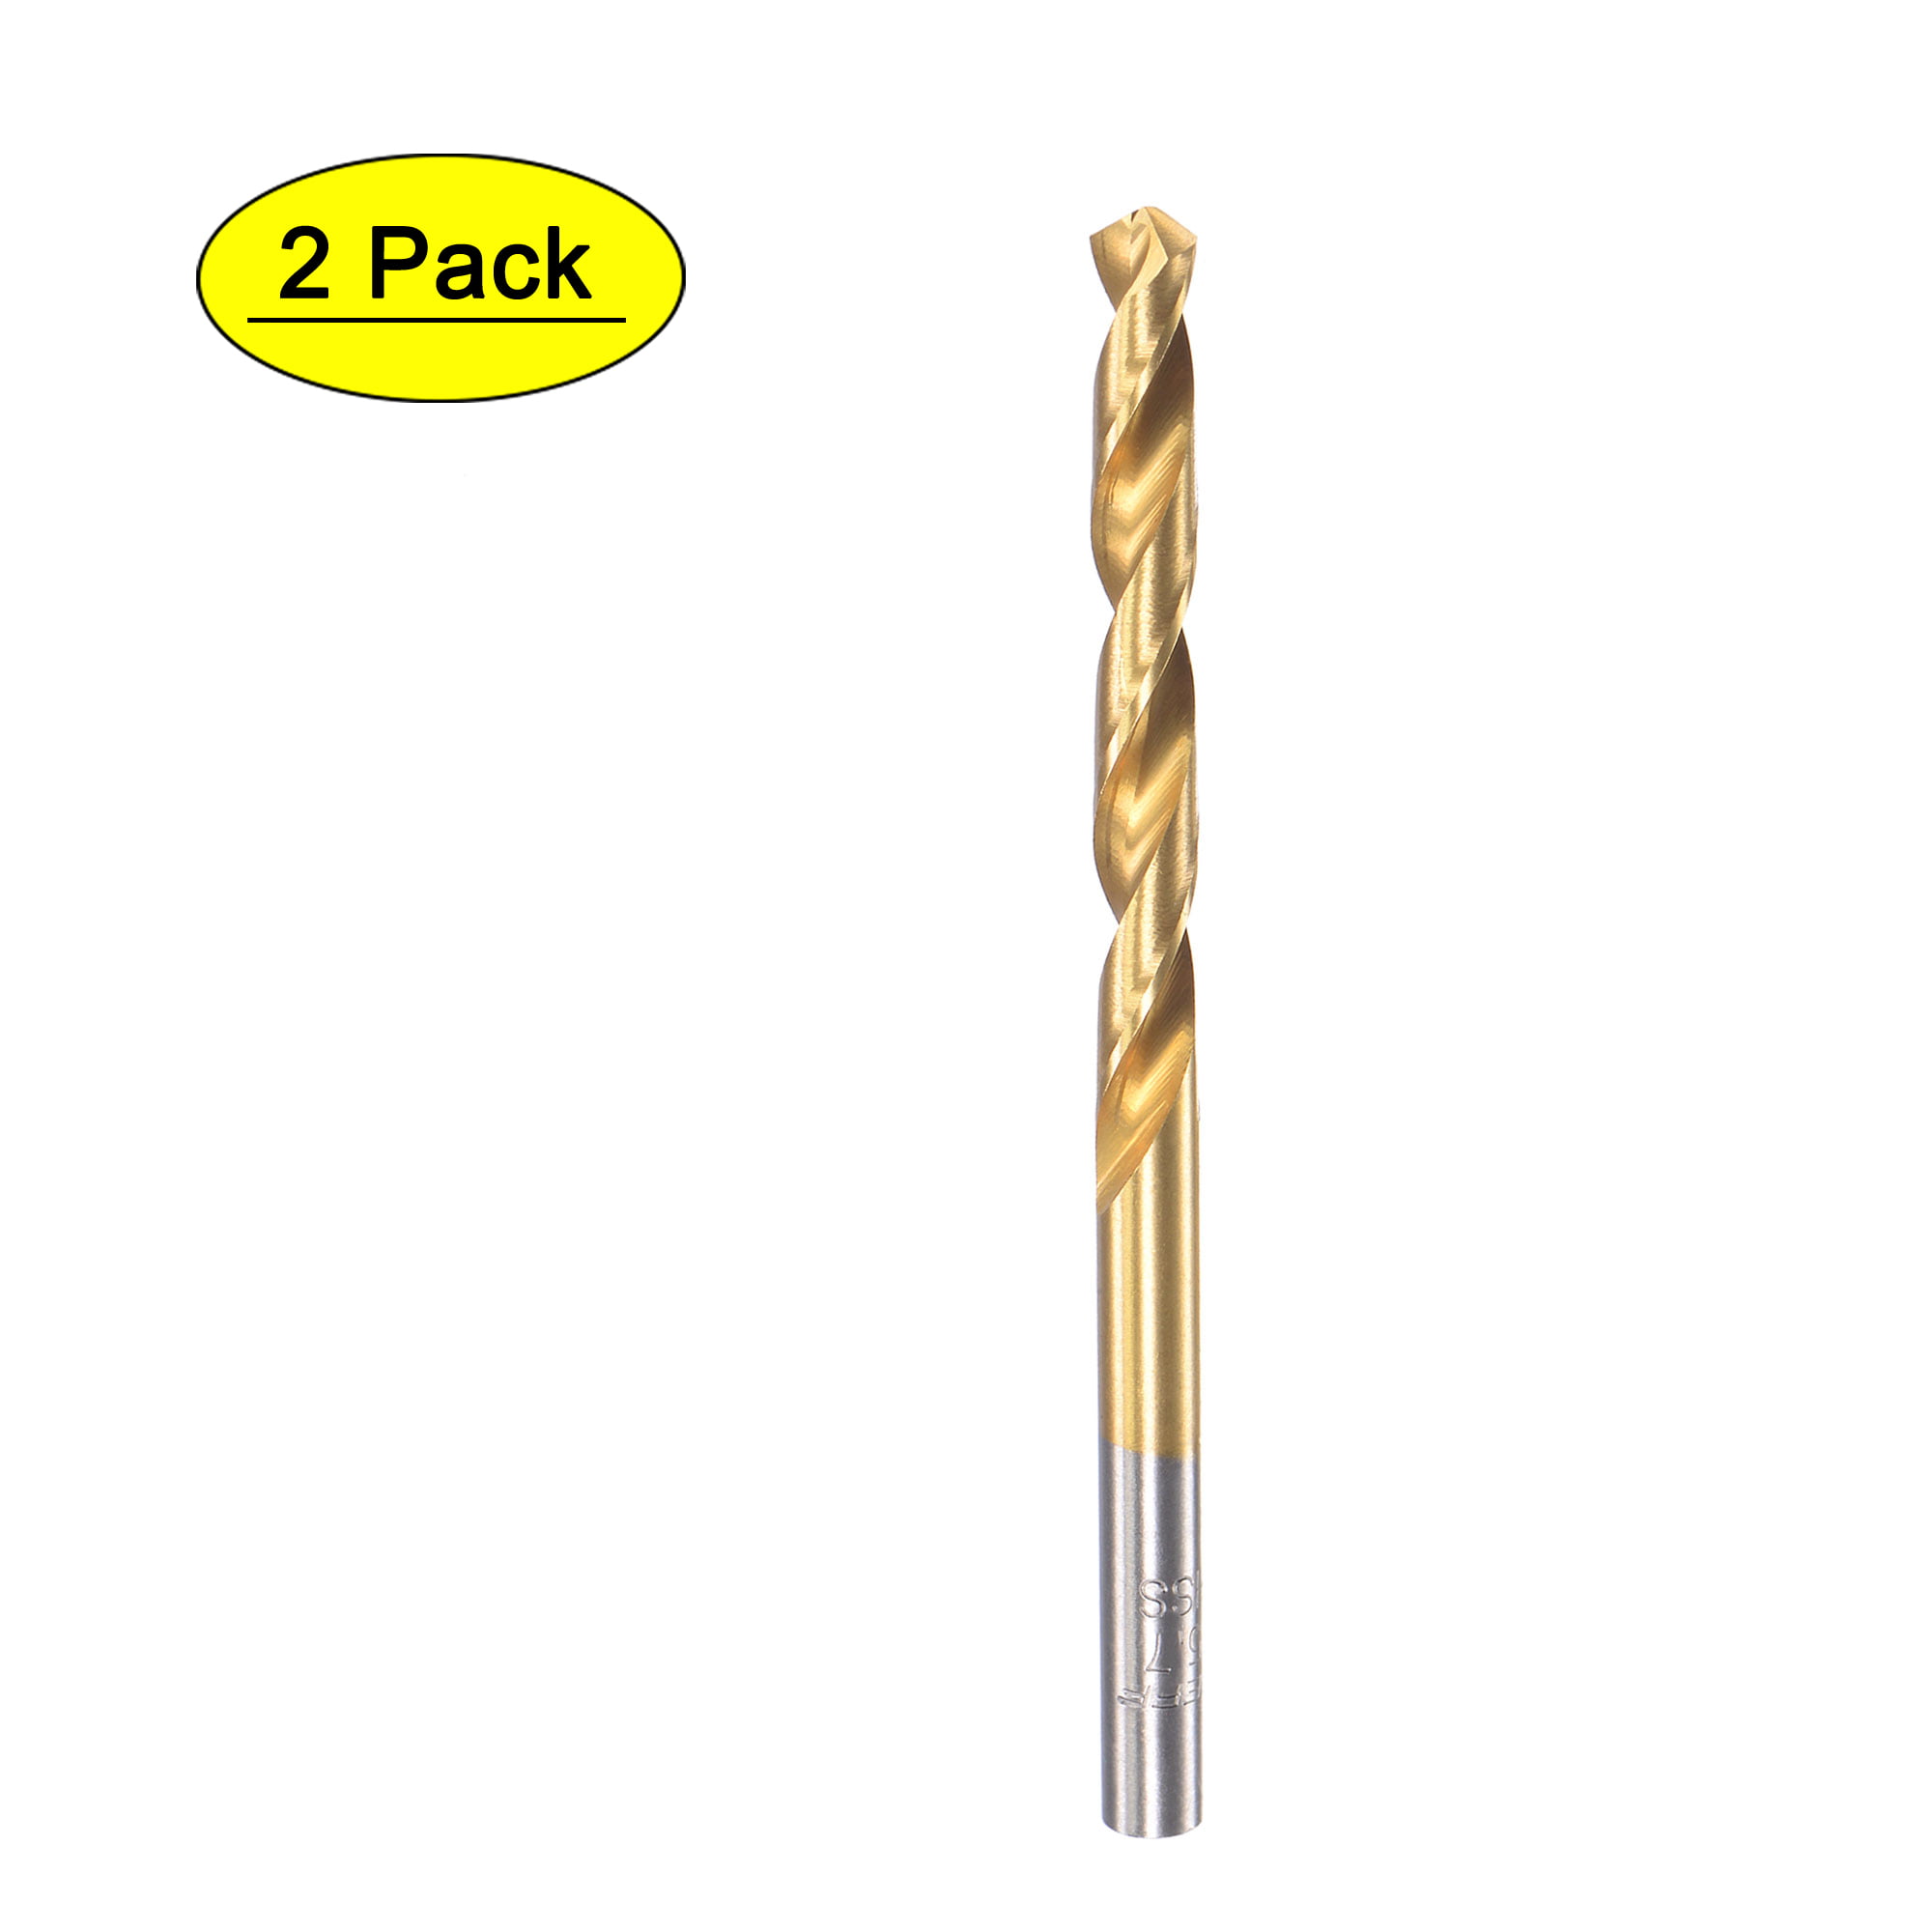 5mm Double Ended HSS Straight Shank Twist Drilling Bit for Electrical Drill 